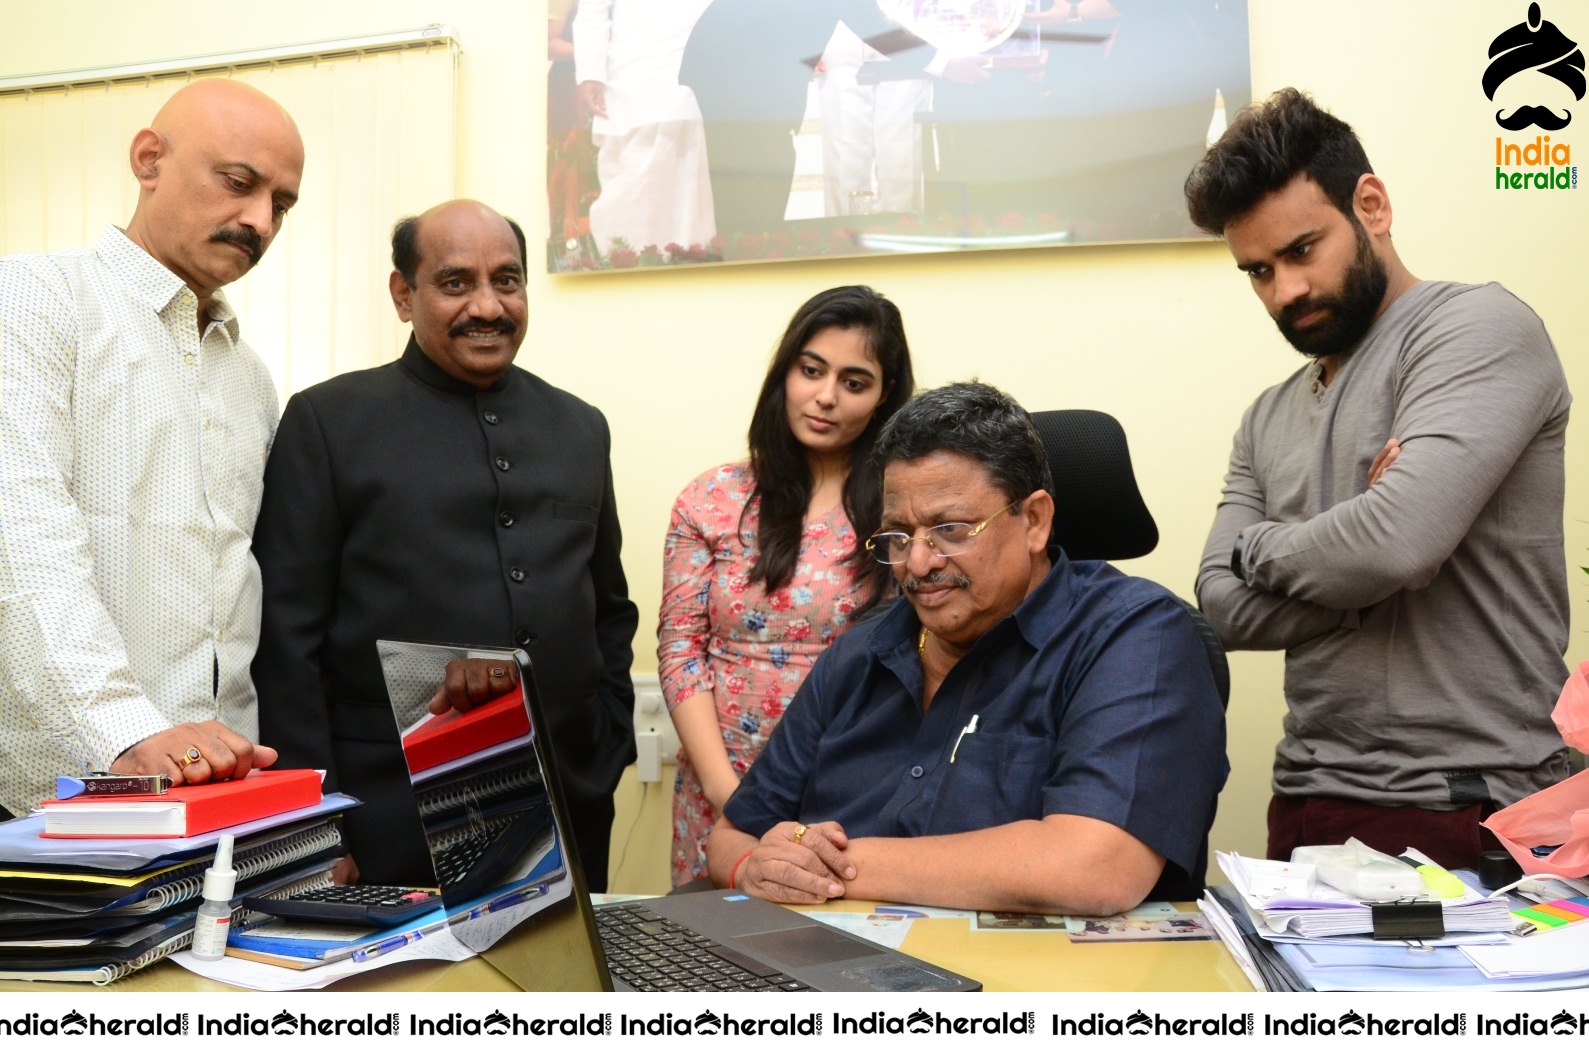 Shiva 143 Movie First Look launched by Producer C Kalyan